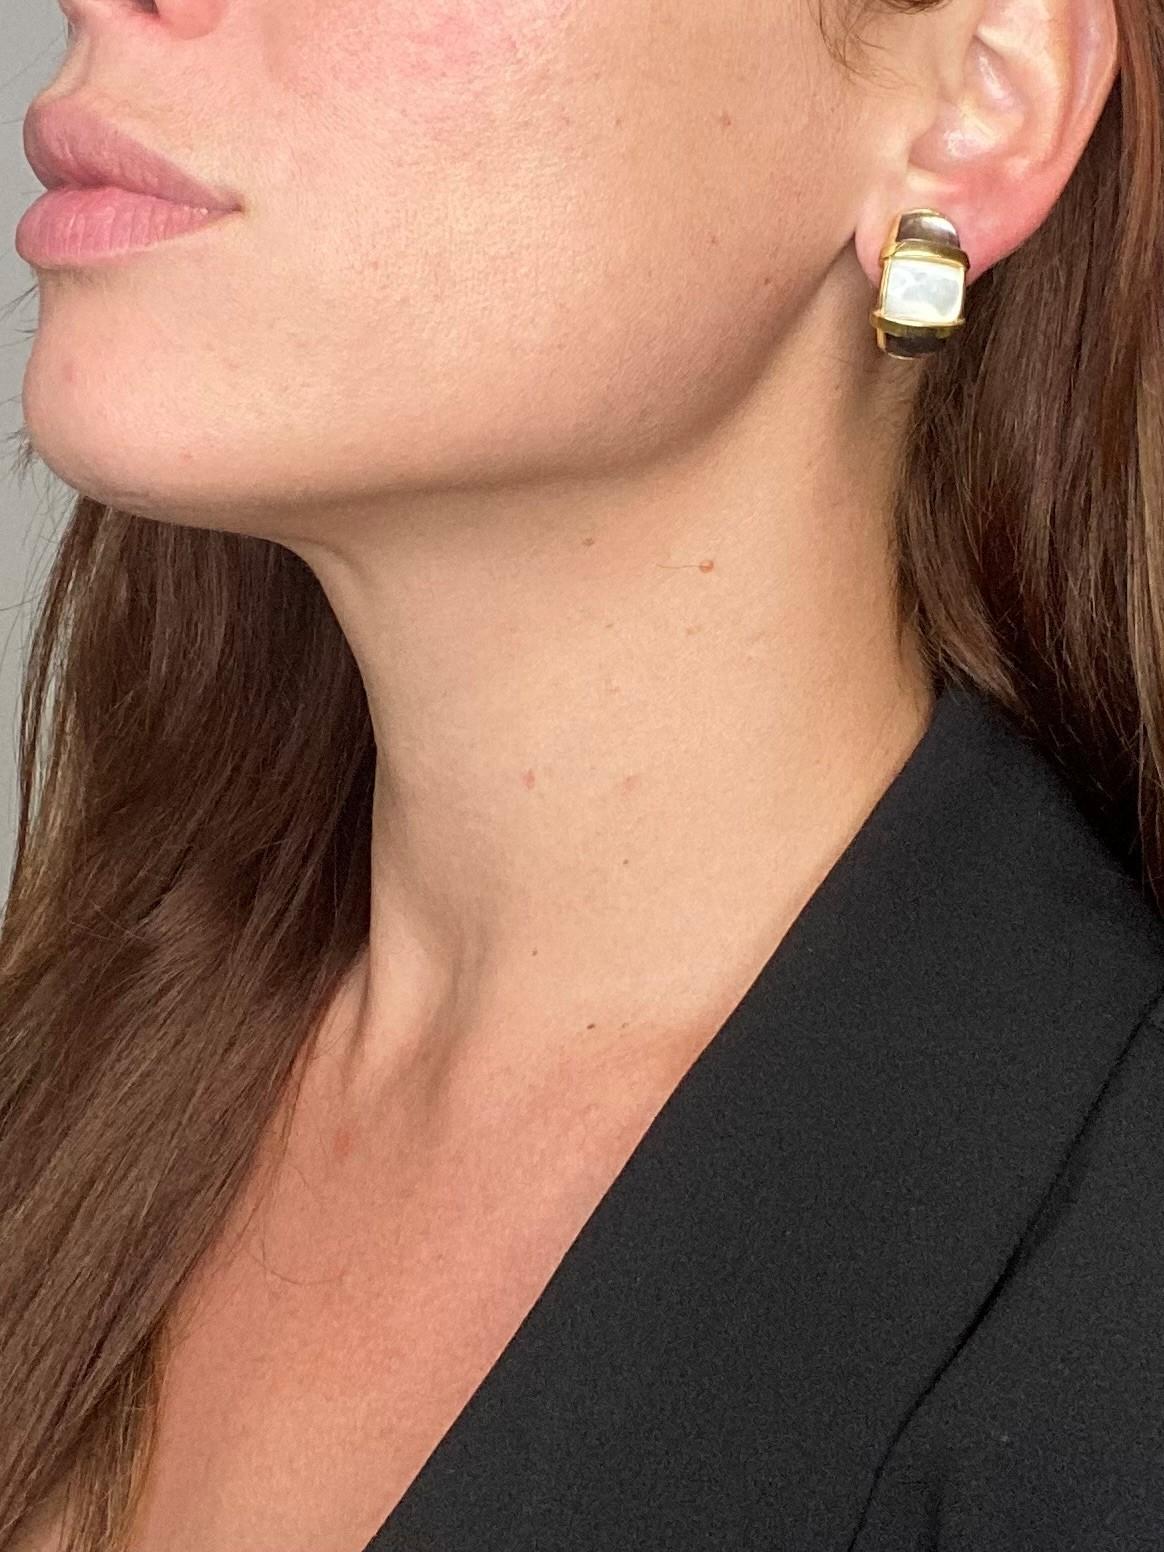 Pair of earrings designed by Andrew Clunn.

Gorgeous pair, created in New York city by the famed jewelry designer Andrew Clunn. These earrings has been crafted in solid yellow gold of 18 karats and finished with high polish. Suited with omega backs